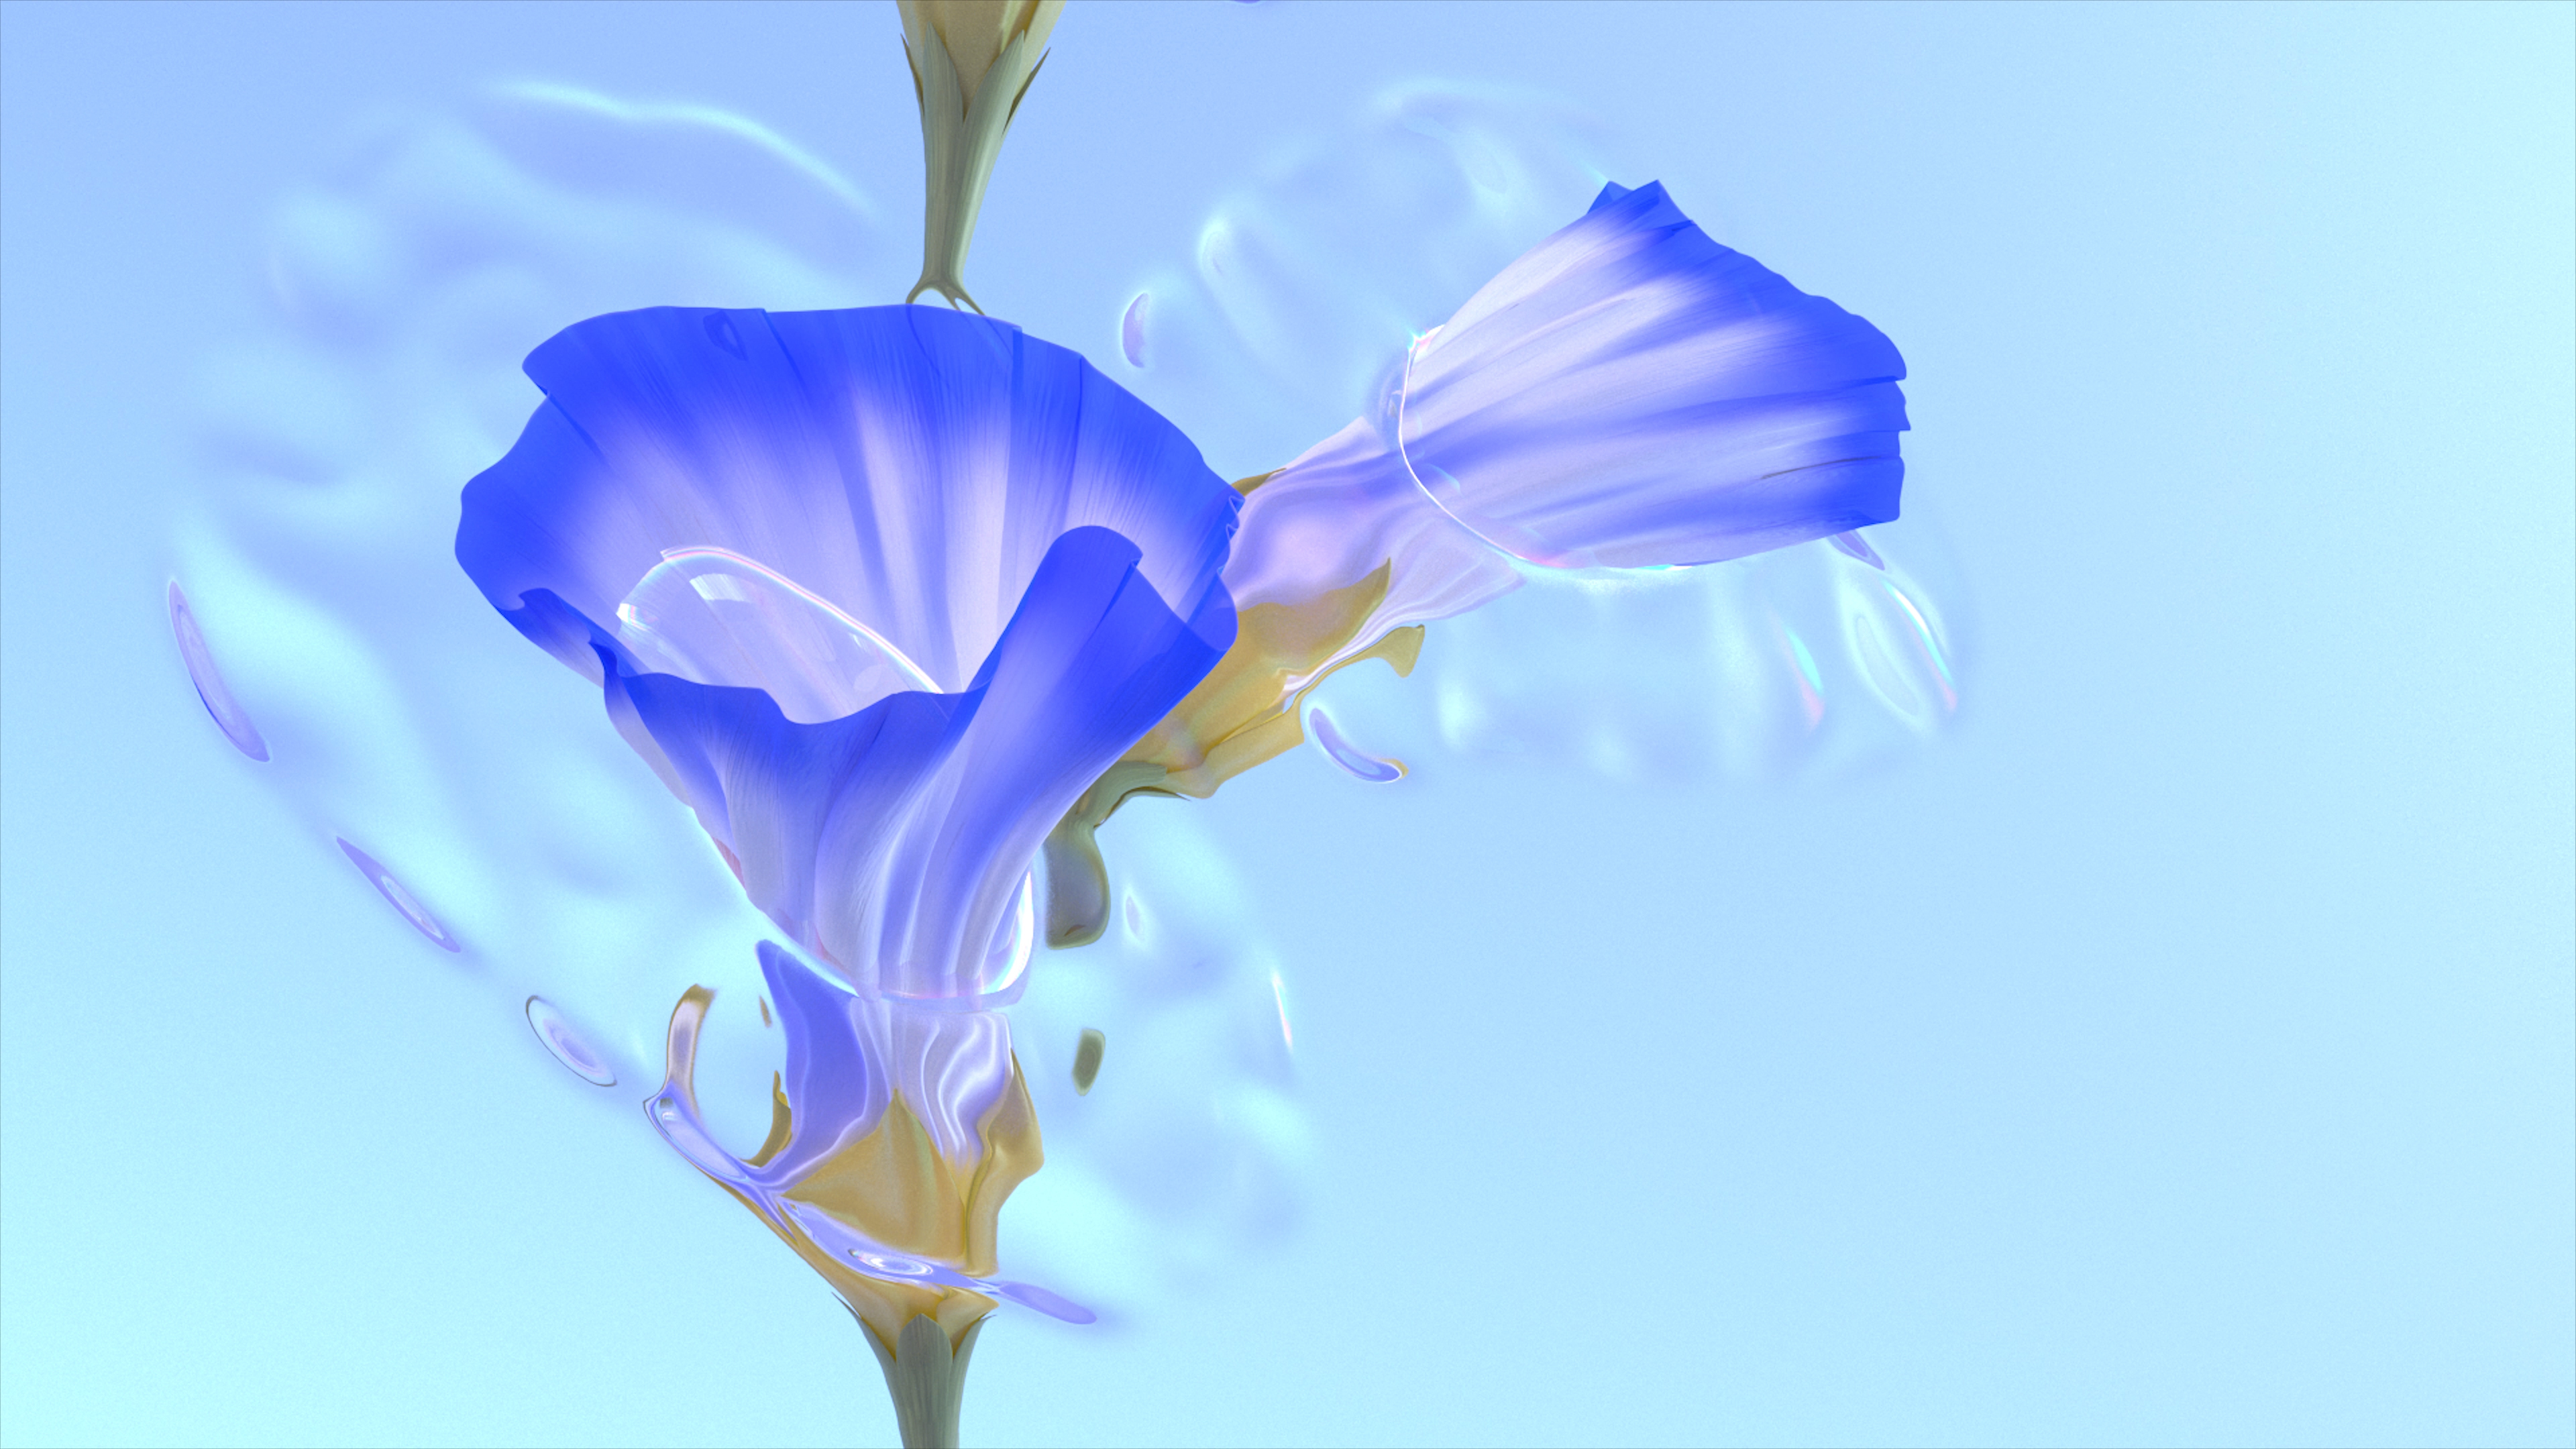 Flowers Abstract 3D Abstract Digital Digital Art Colorful Render Blooming Plants 3840x2160